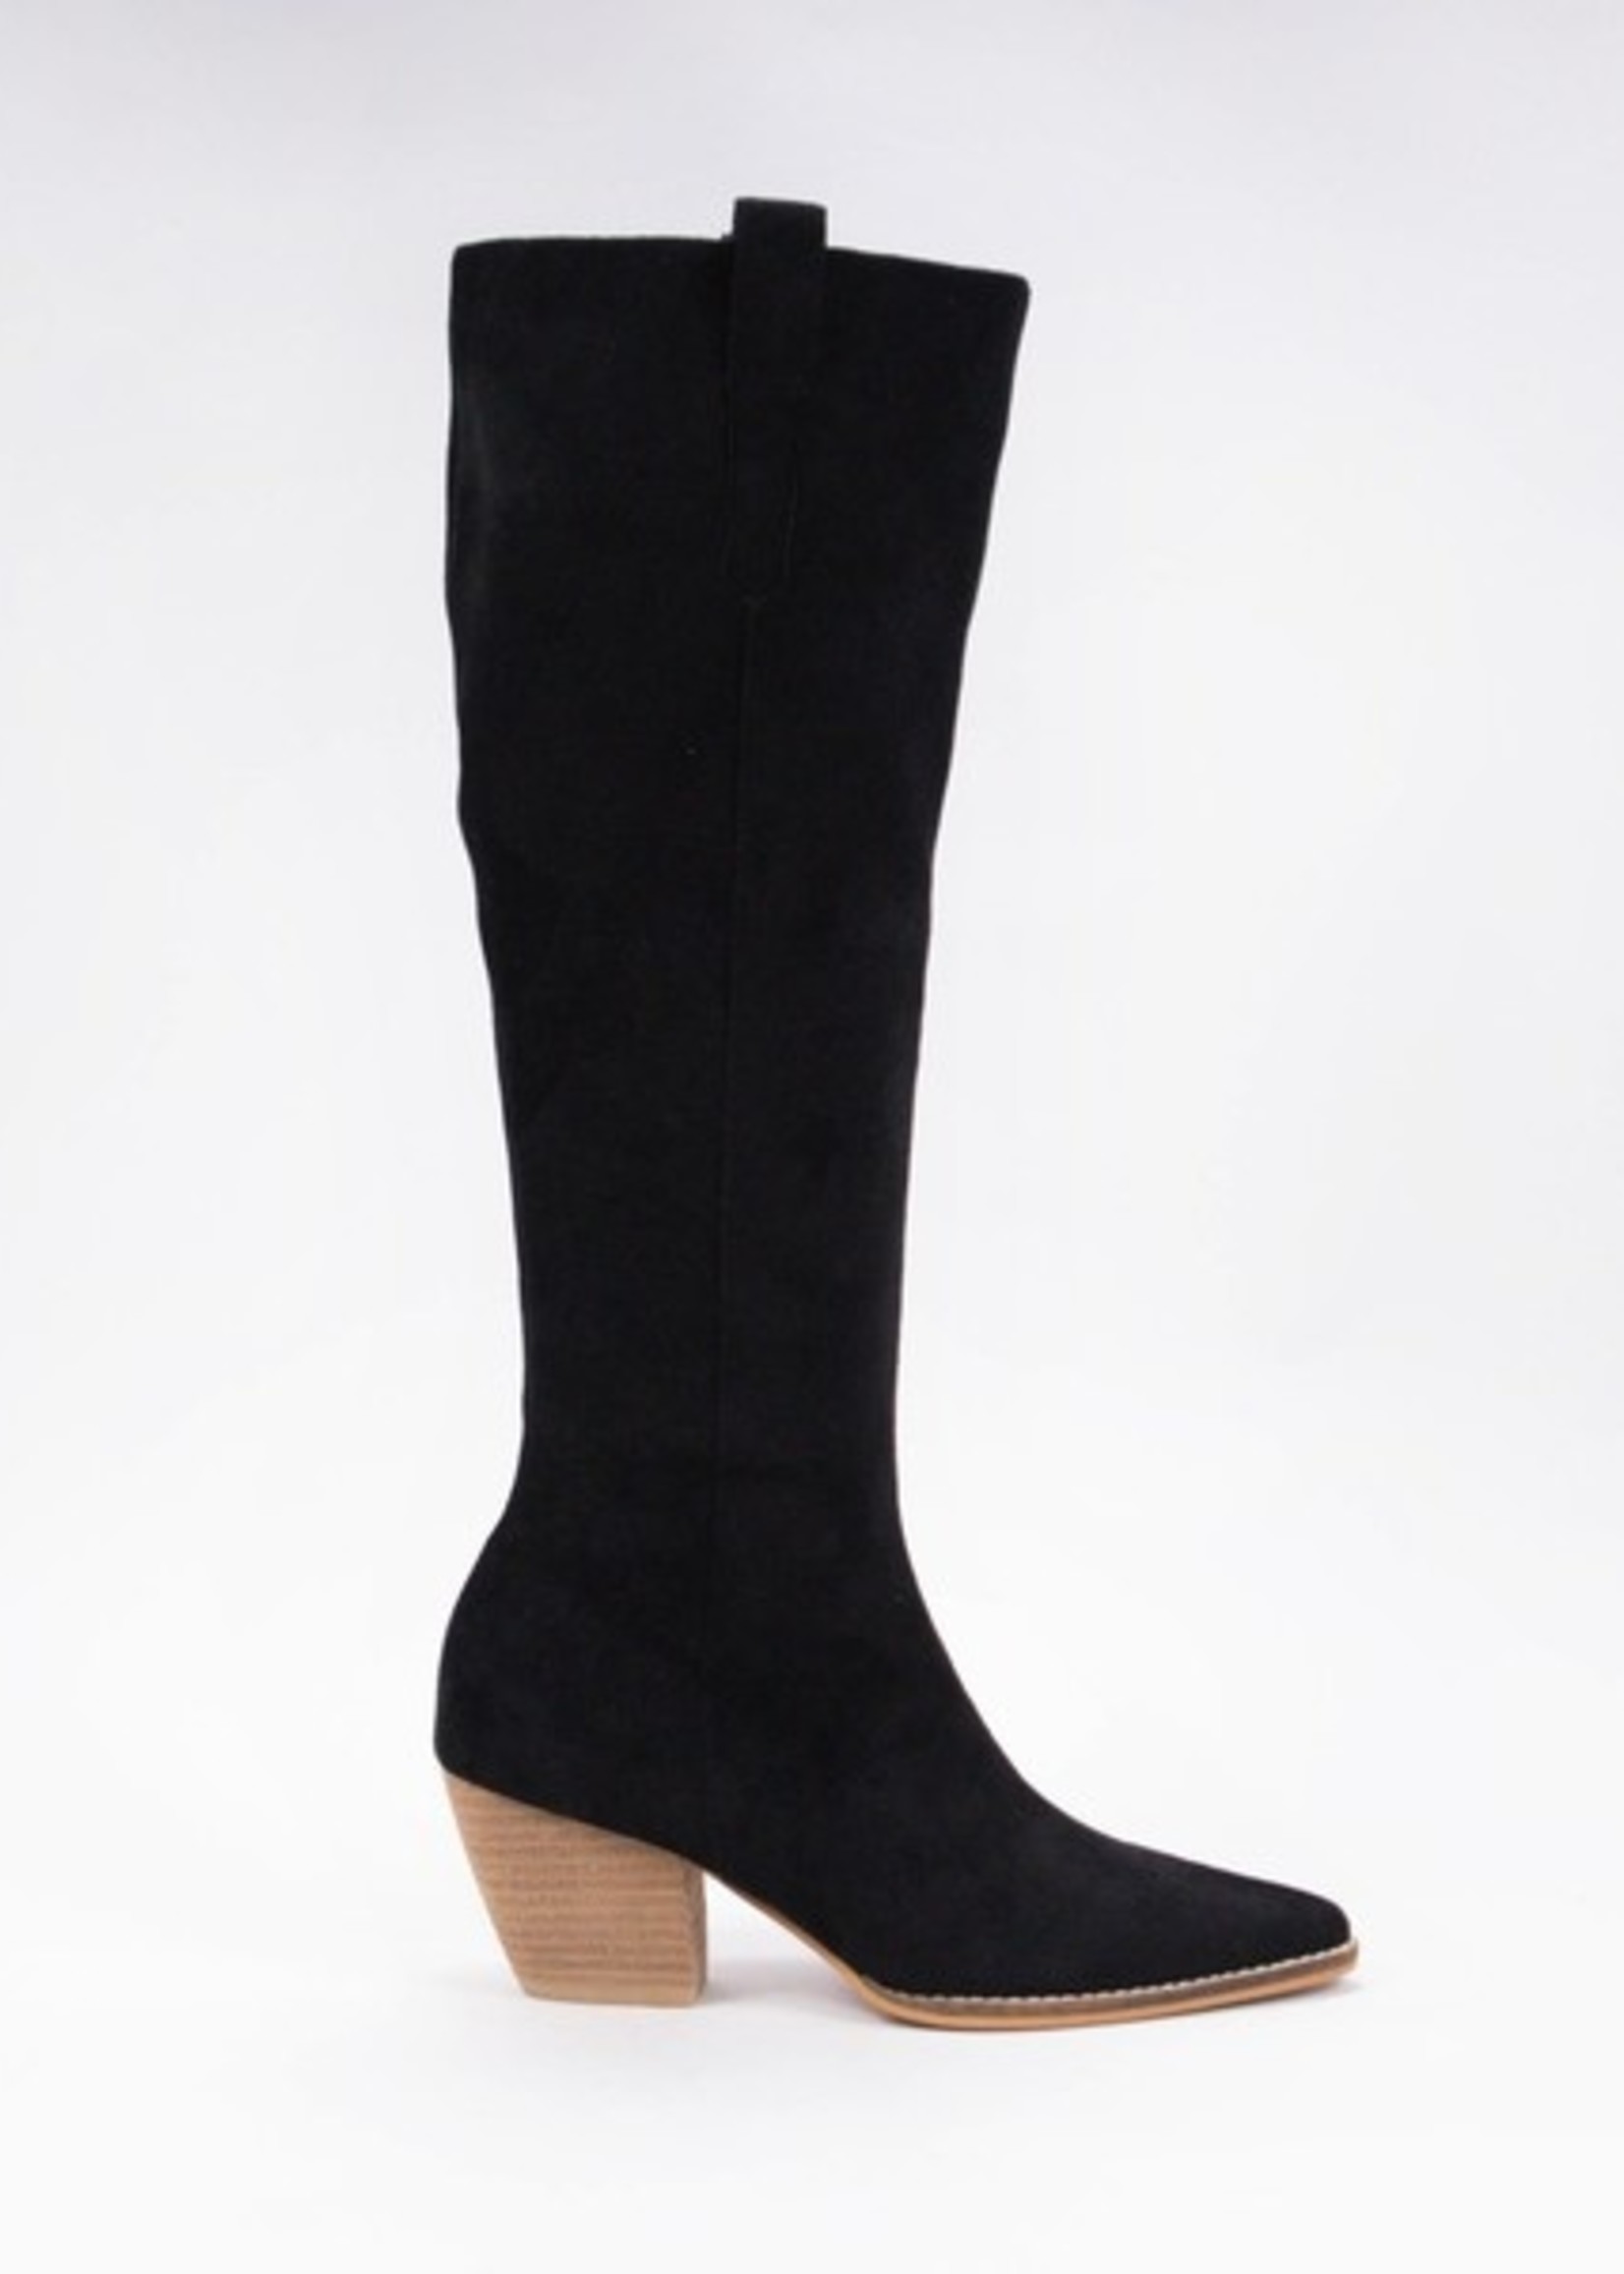 Best Of All Black Boot